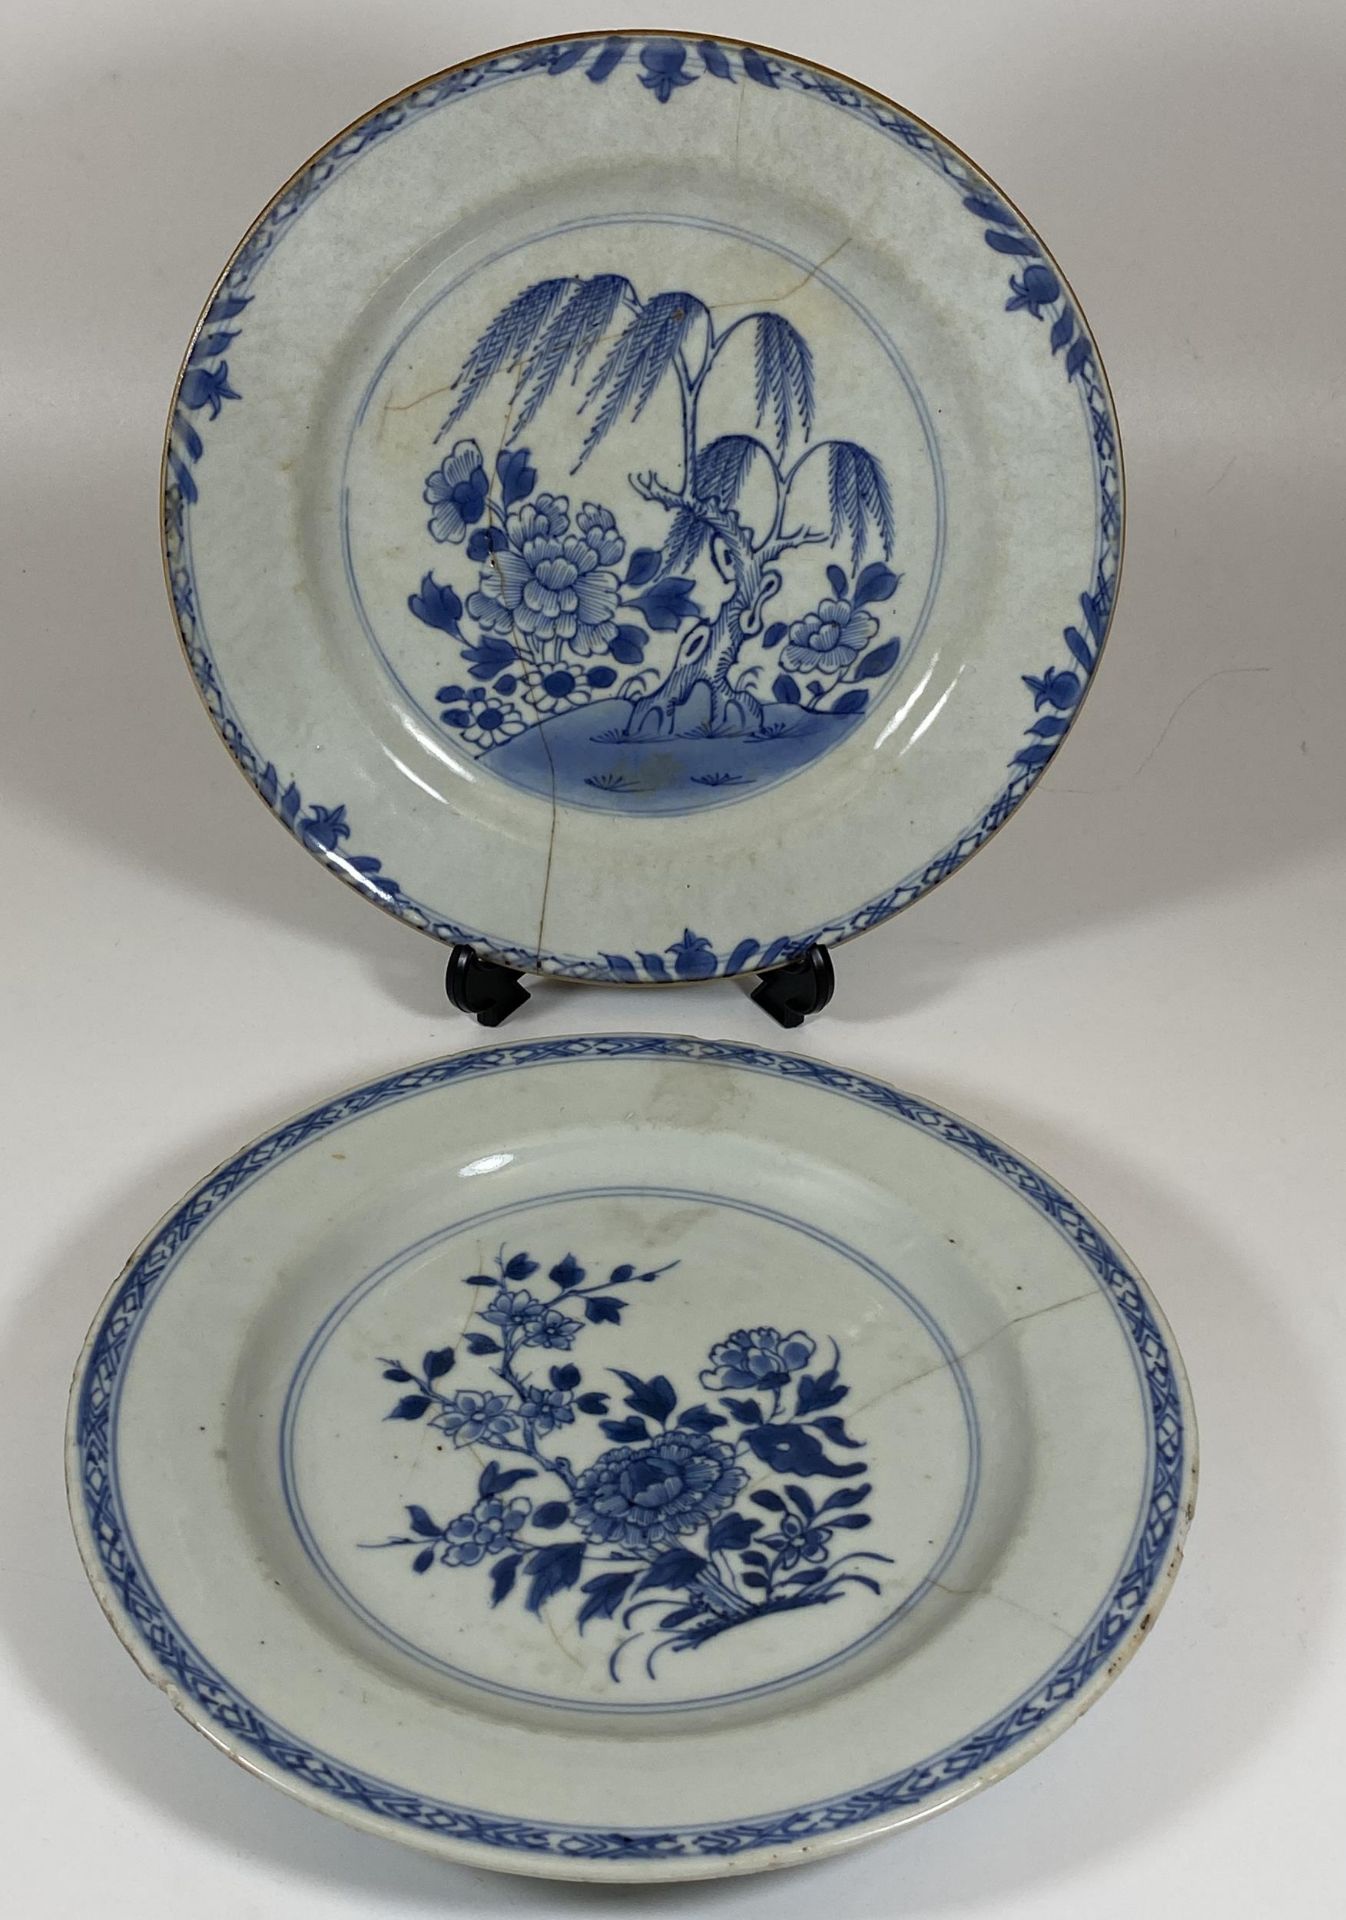 A PAIR OF 18TH CENTURY CHINESE BLUE AND WHITE FLORAL PLATES, DIAMETER 23CM